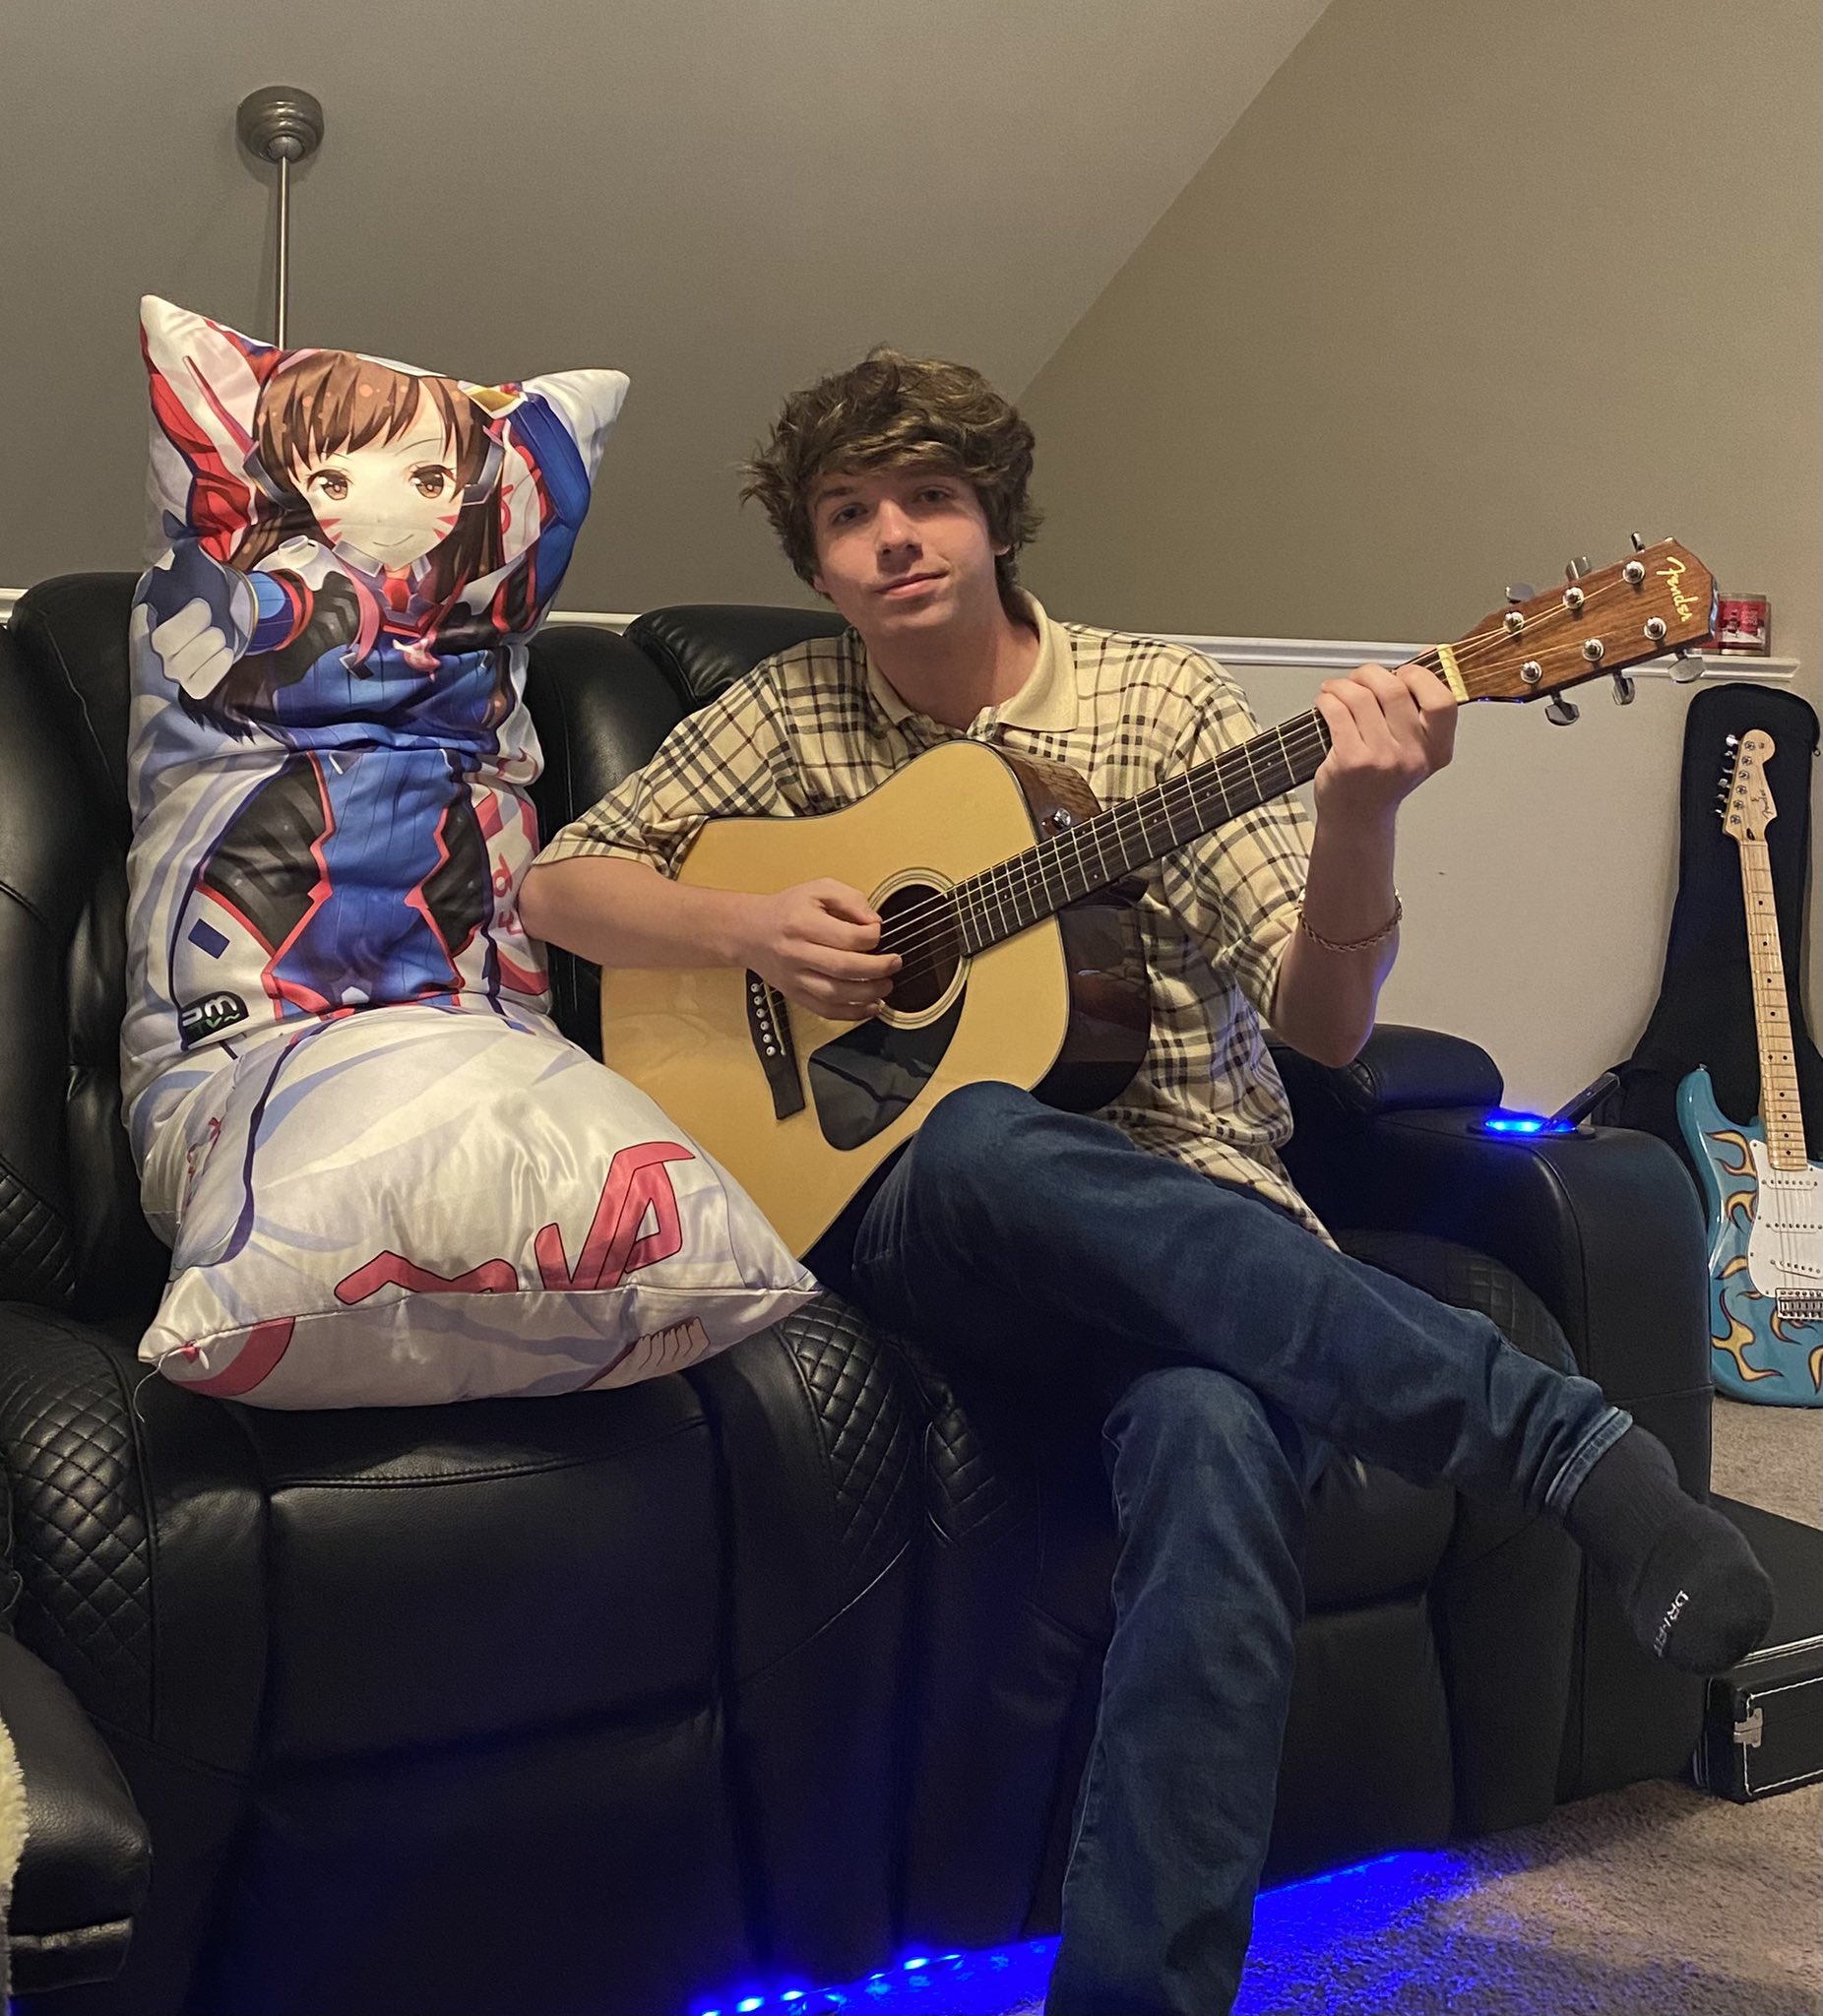 Karl Jacobs holding a guitar and wearing checkered shirt with an anime girl pillow 